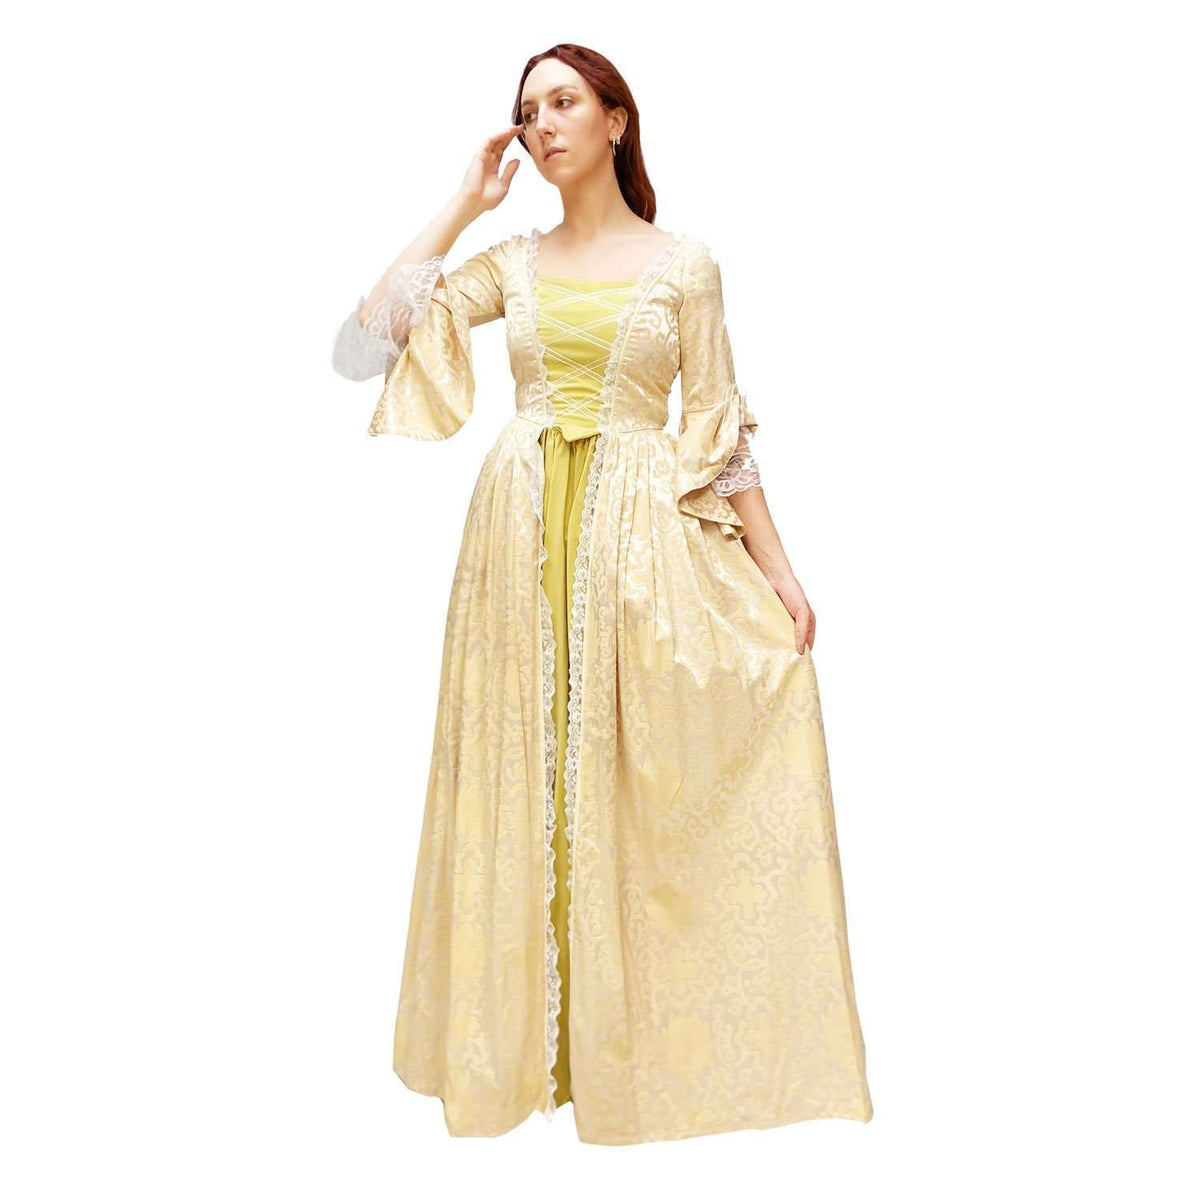 Exclusive Colonial Women Lady Marie Adult Costume in Canary Yellow